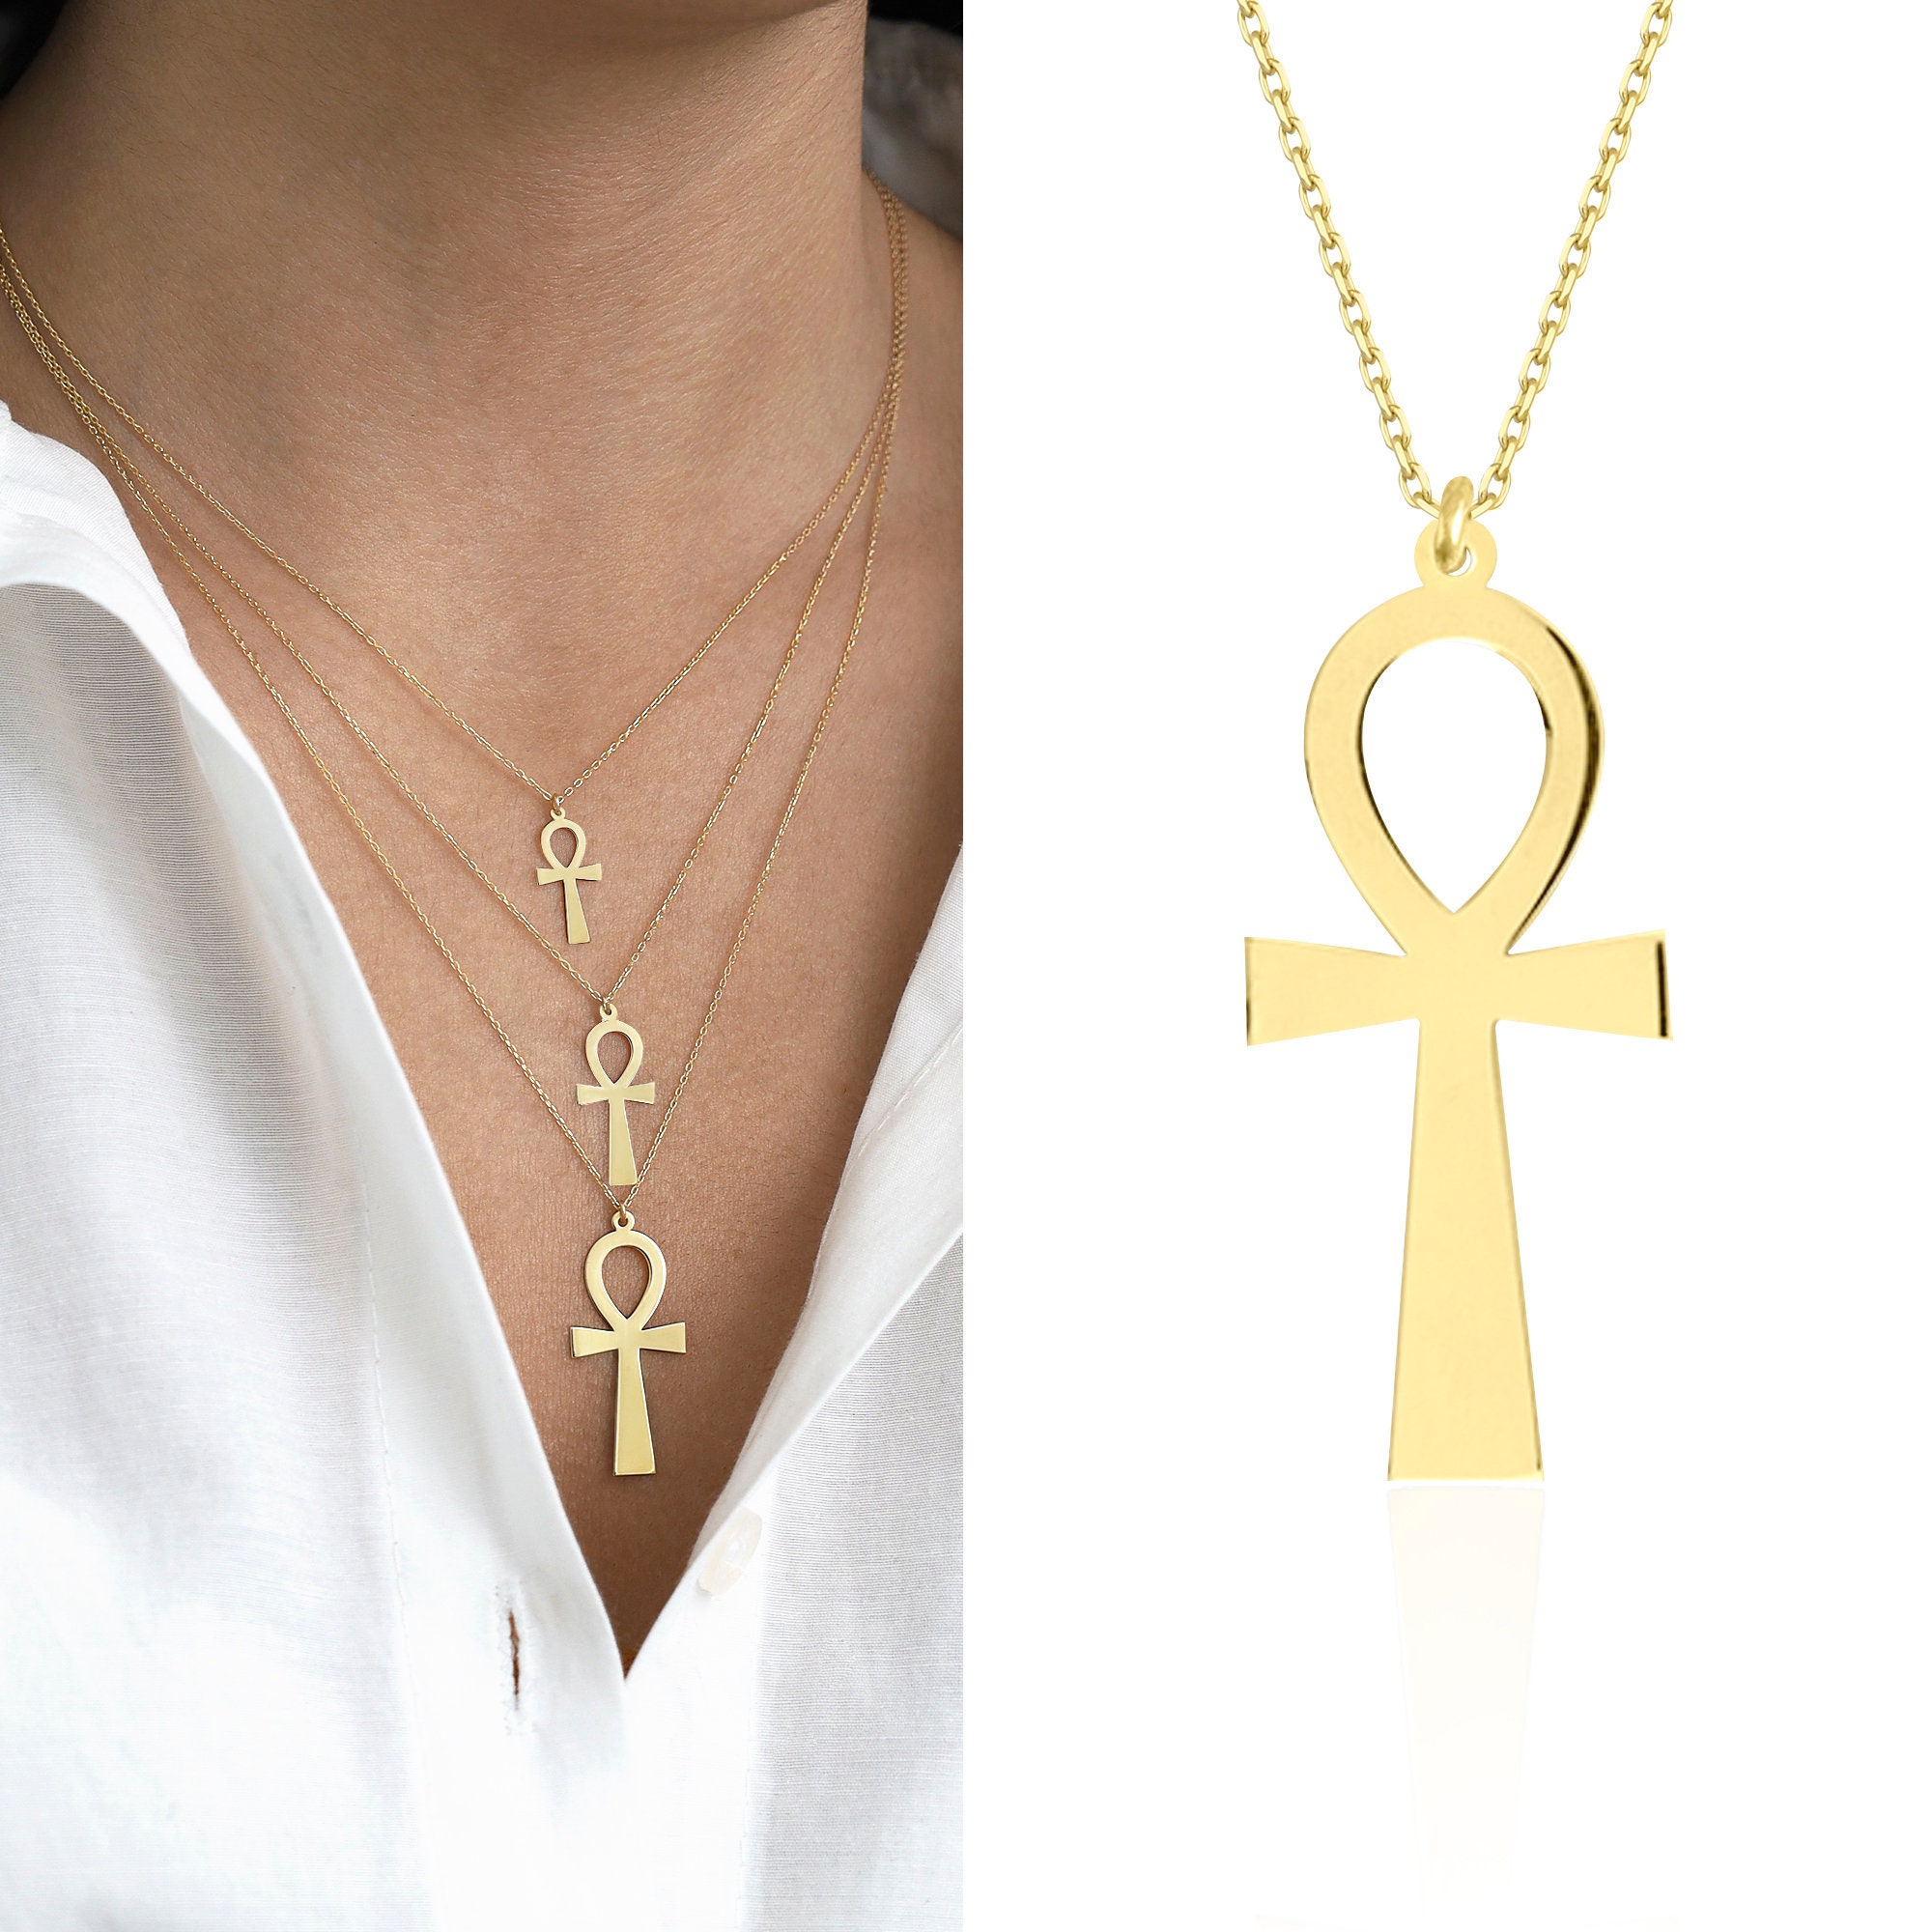 14k Gold MEDIUM Ankh Necklace | Ancient Ankh Charm Pendant, Life & Soul Symbol Necklace, Minimalist Cross Necklace | Gift for Her